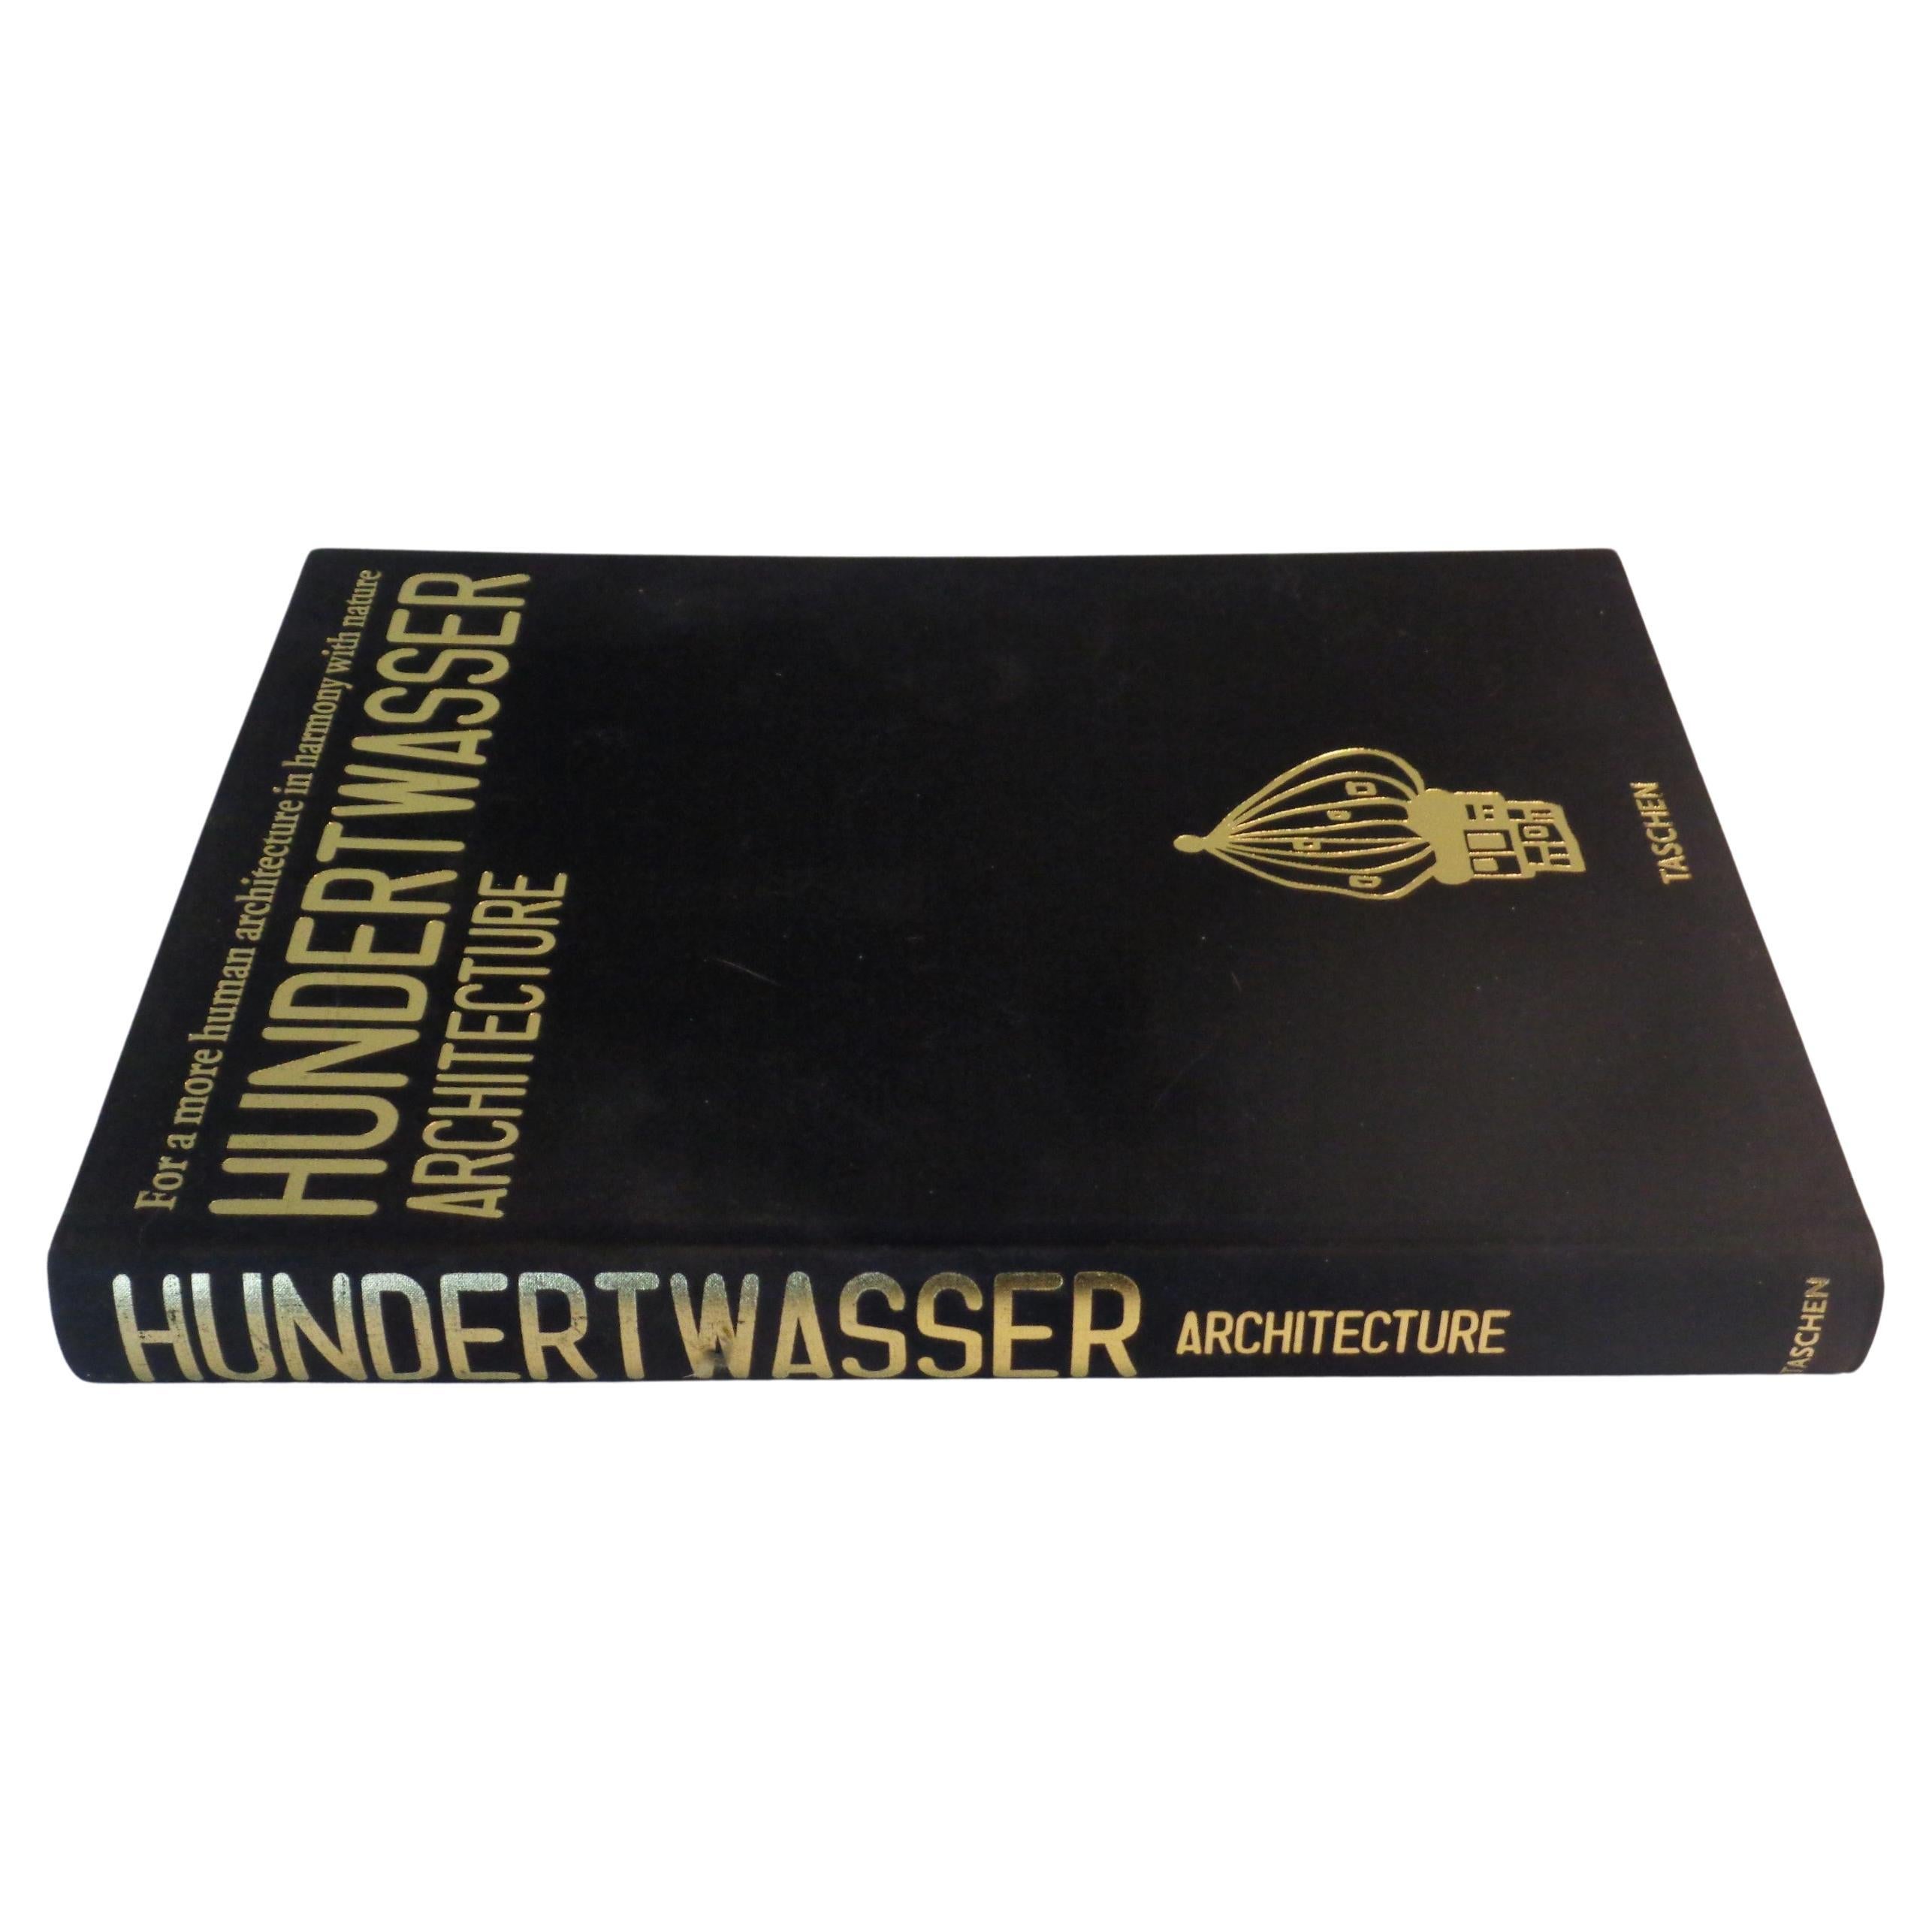 Hundertwasser Architecture 1997 Taschen 1st Edition. Hard cover black cloth with gilt lettering, Includes wrap around die cut band, 317 pages. Catalogue Raisonne of Hundertwasser architecture - illustrations showing period photographs, maps,